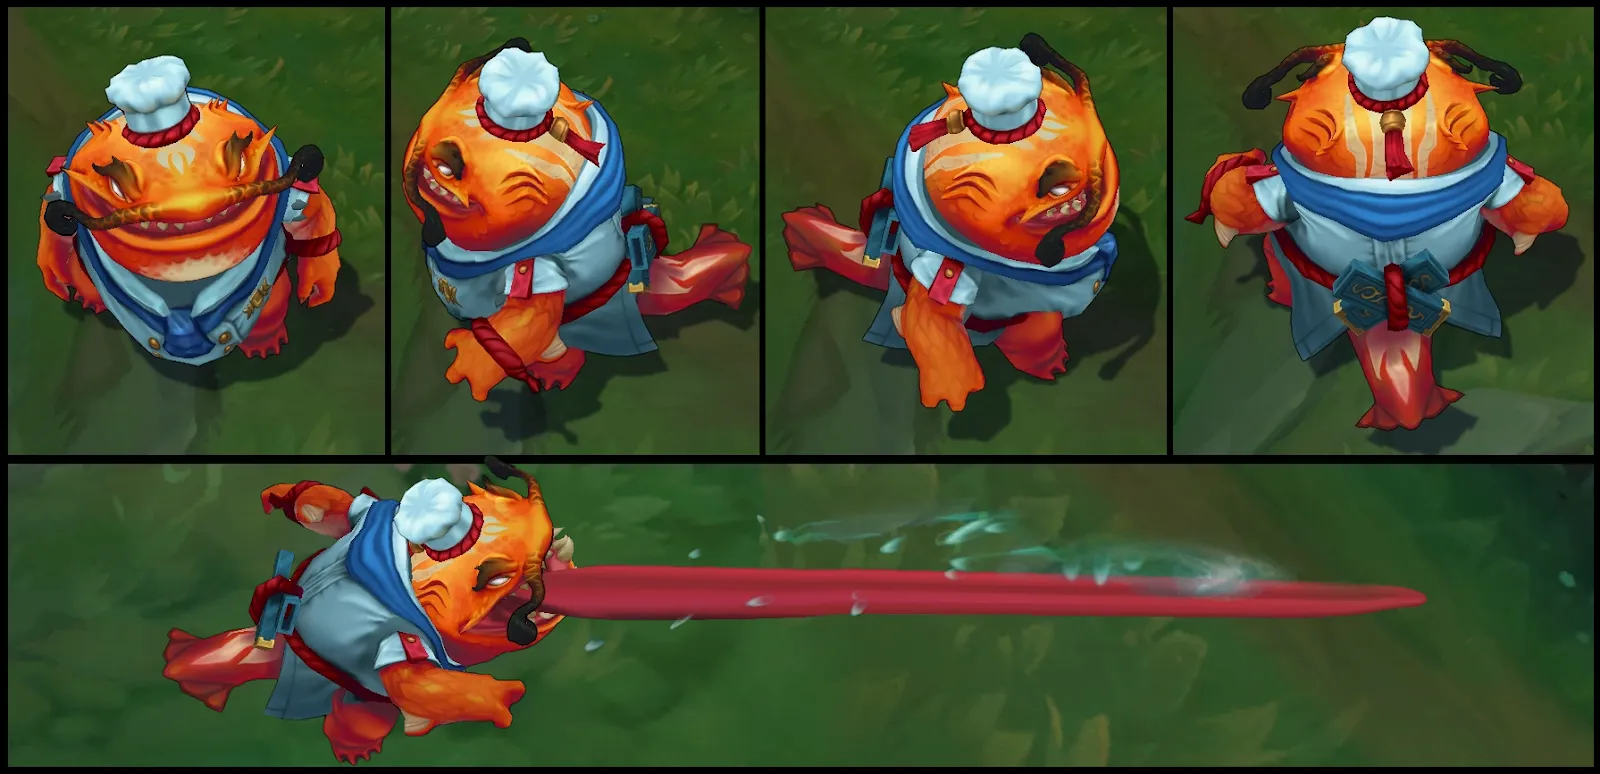 Master Chef Tahm Kench in game model